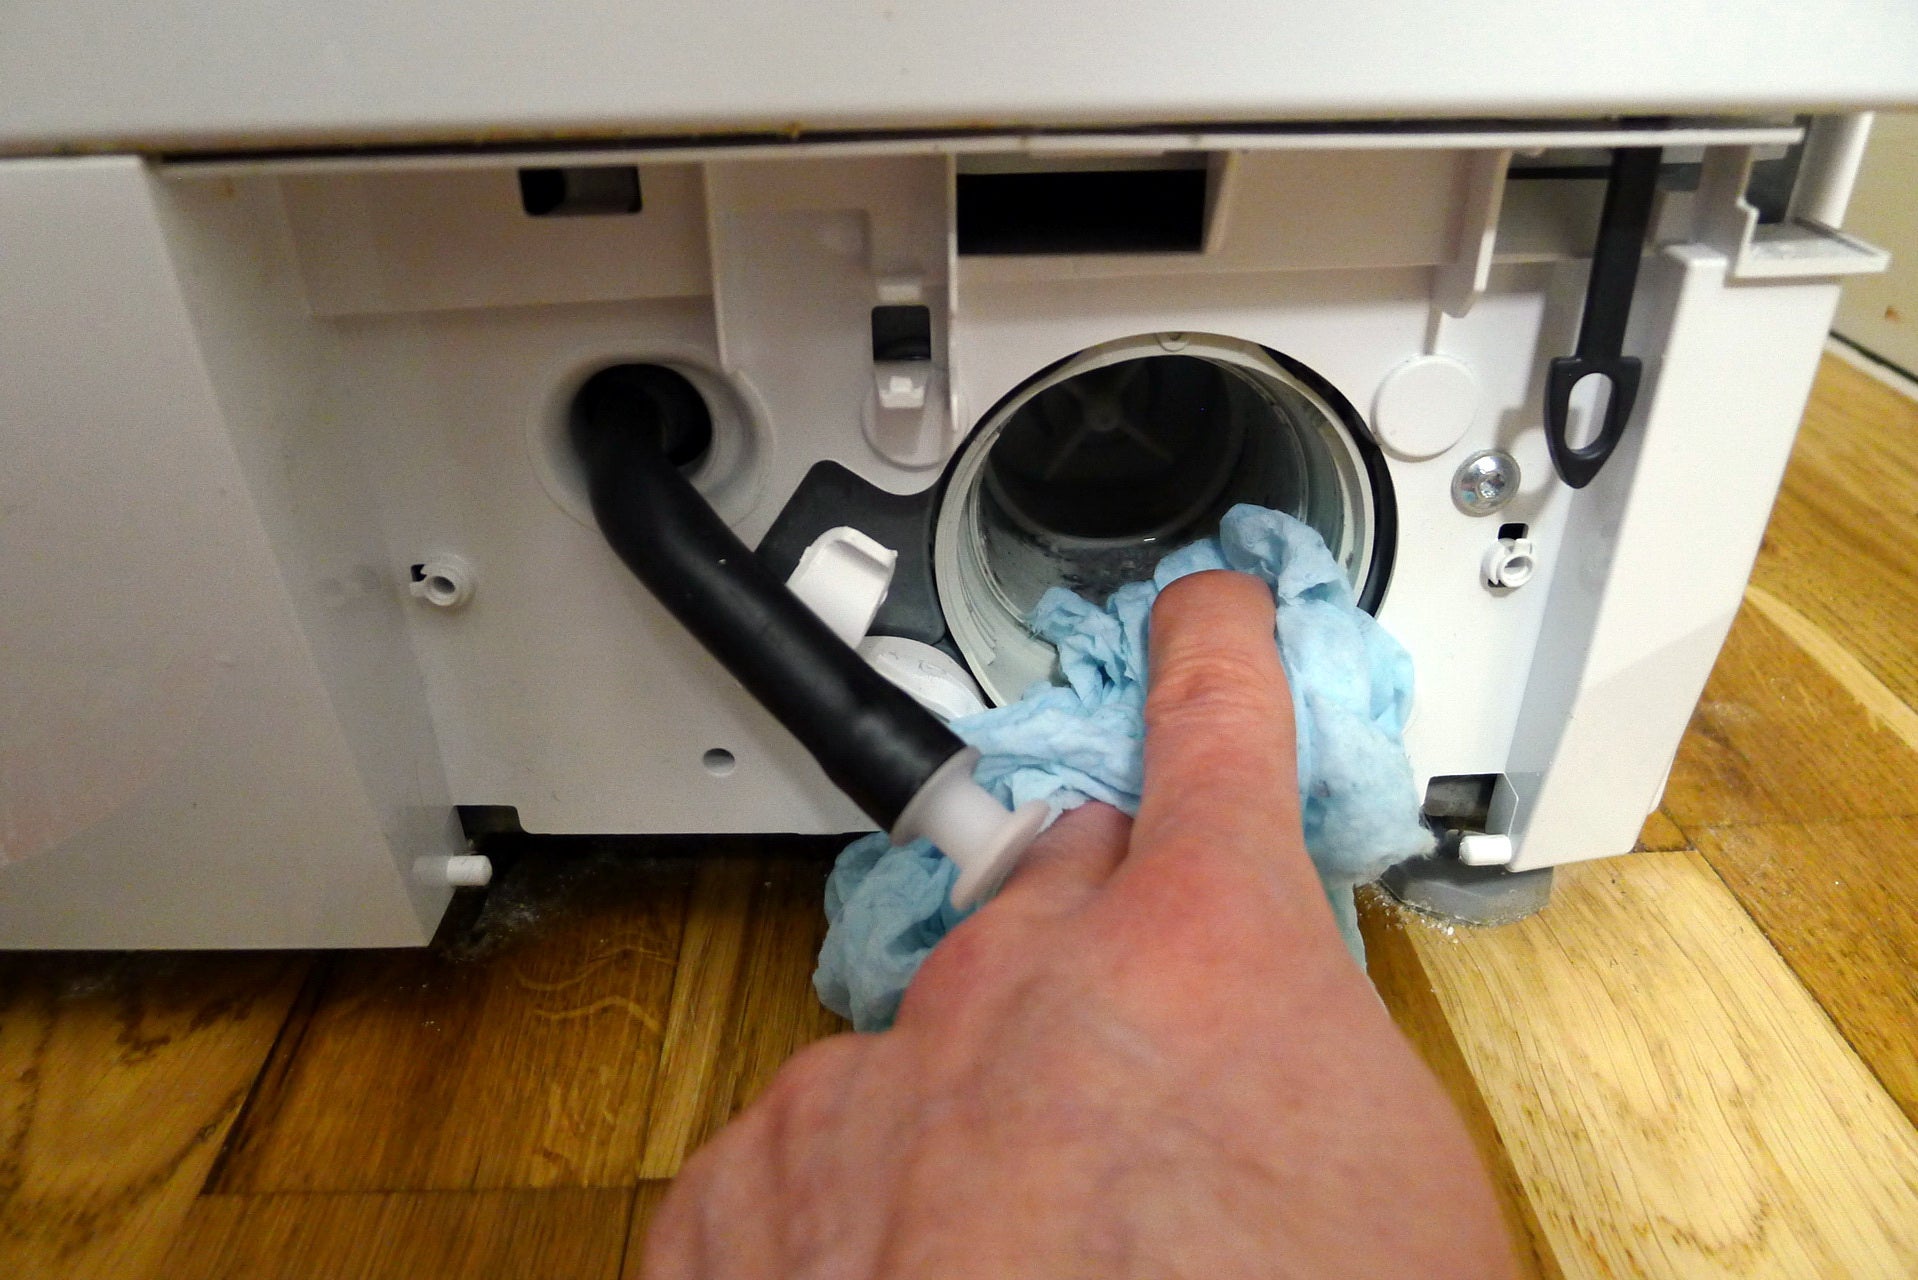 Wiping clean the washing machine pump cover screw thread